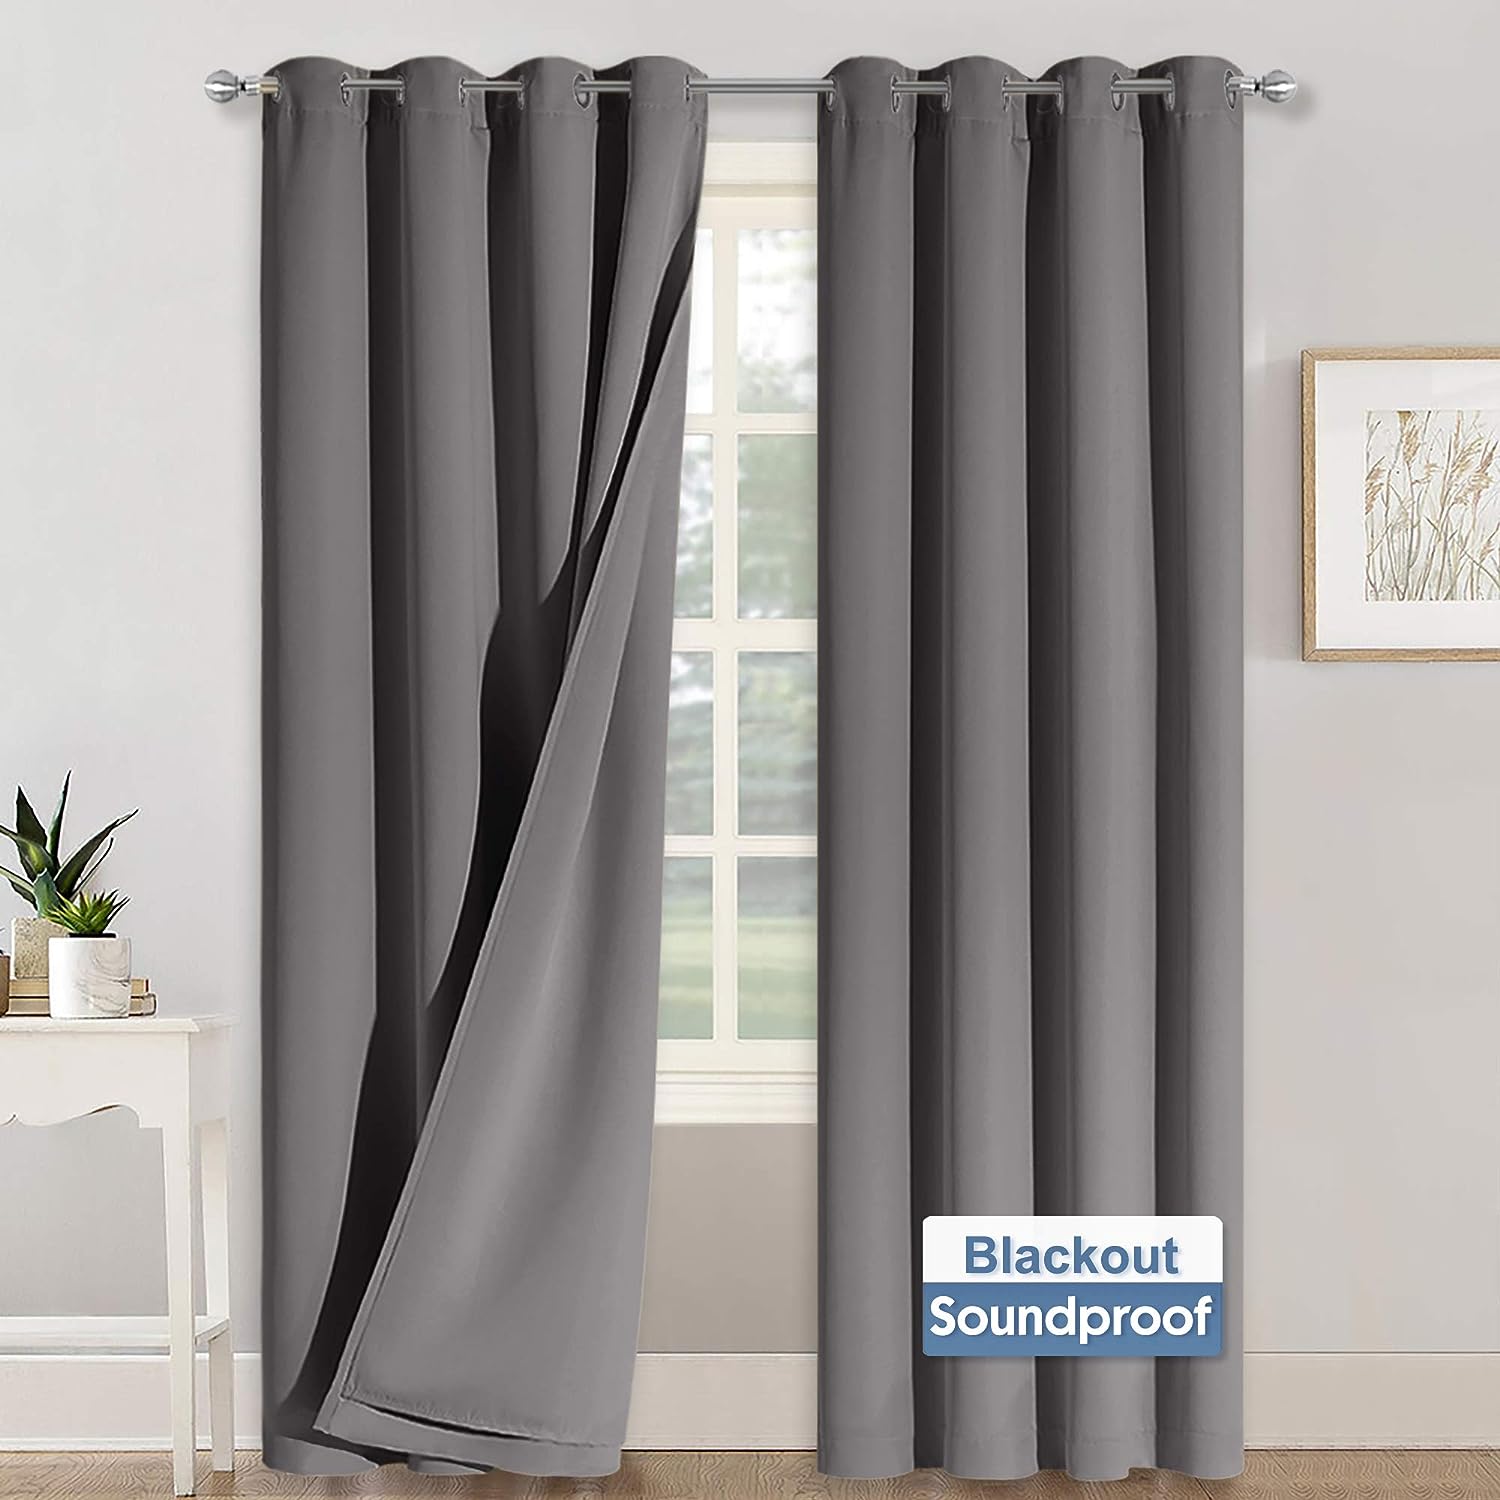 RYB HOME Soundproof Curtains 84 inches - 3 Layers [...]